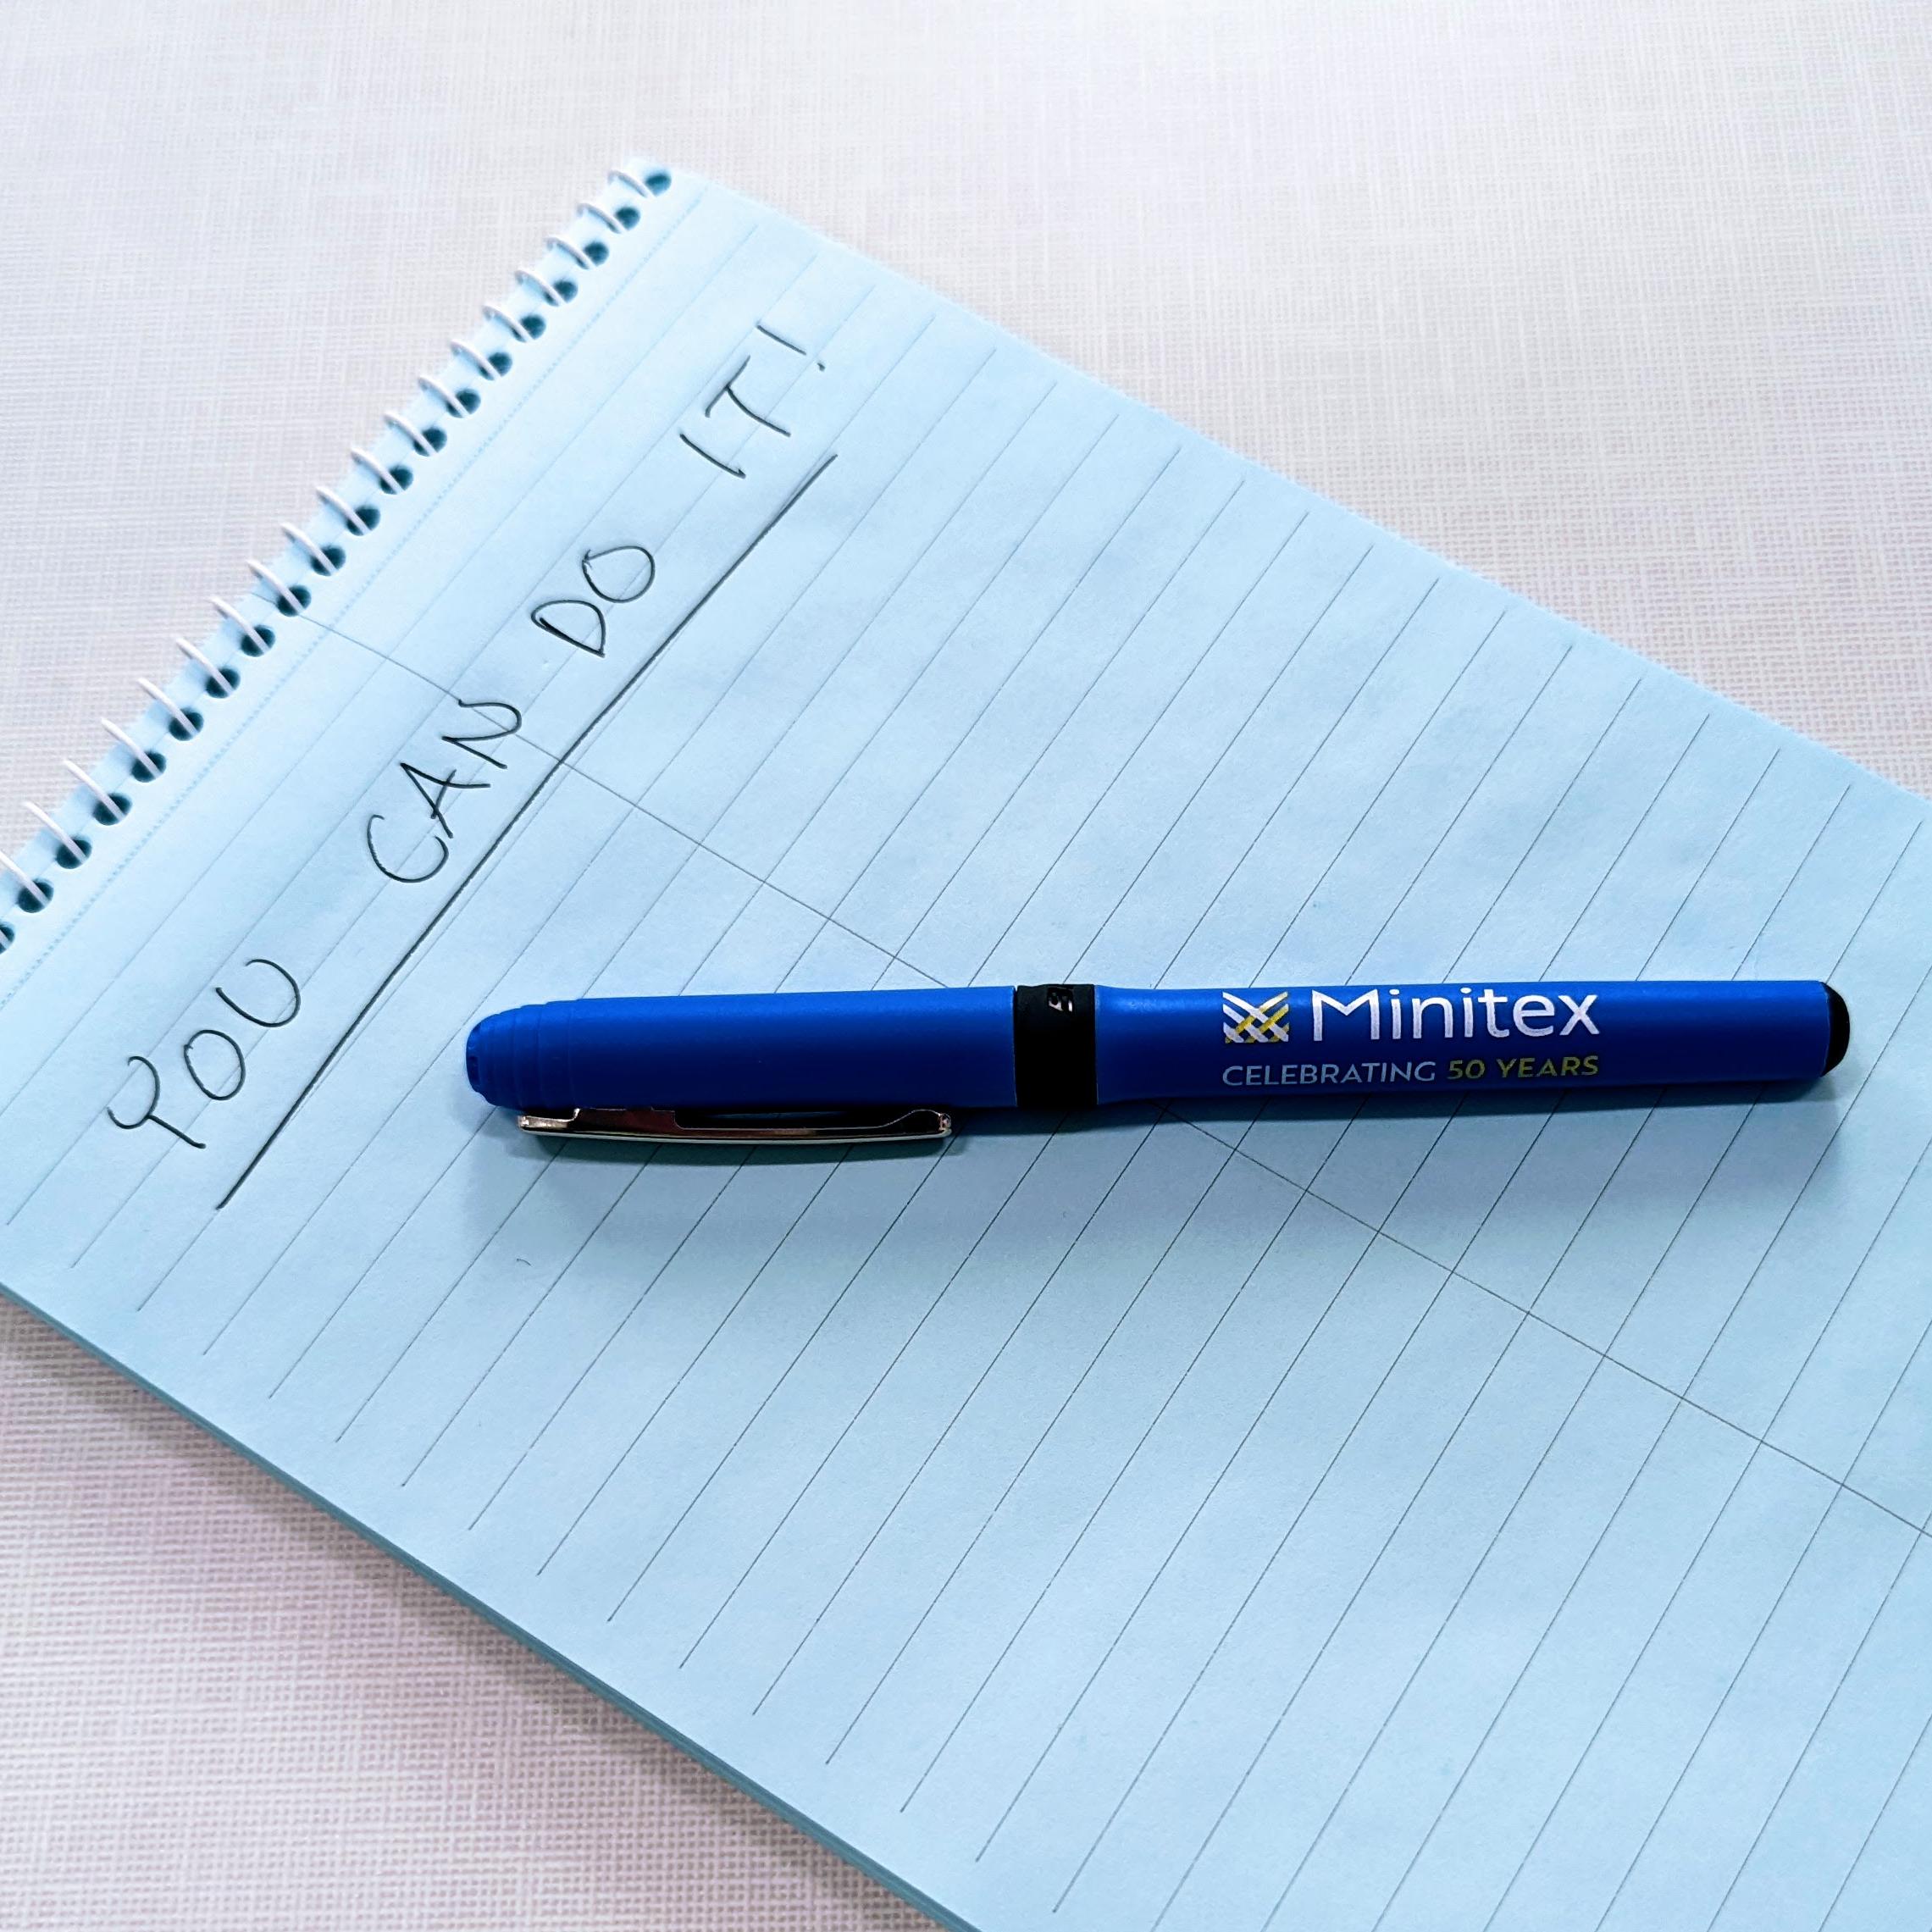 An image of a blue Minitex pen sitting on a notepad with "You can do it!" written at the top.